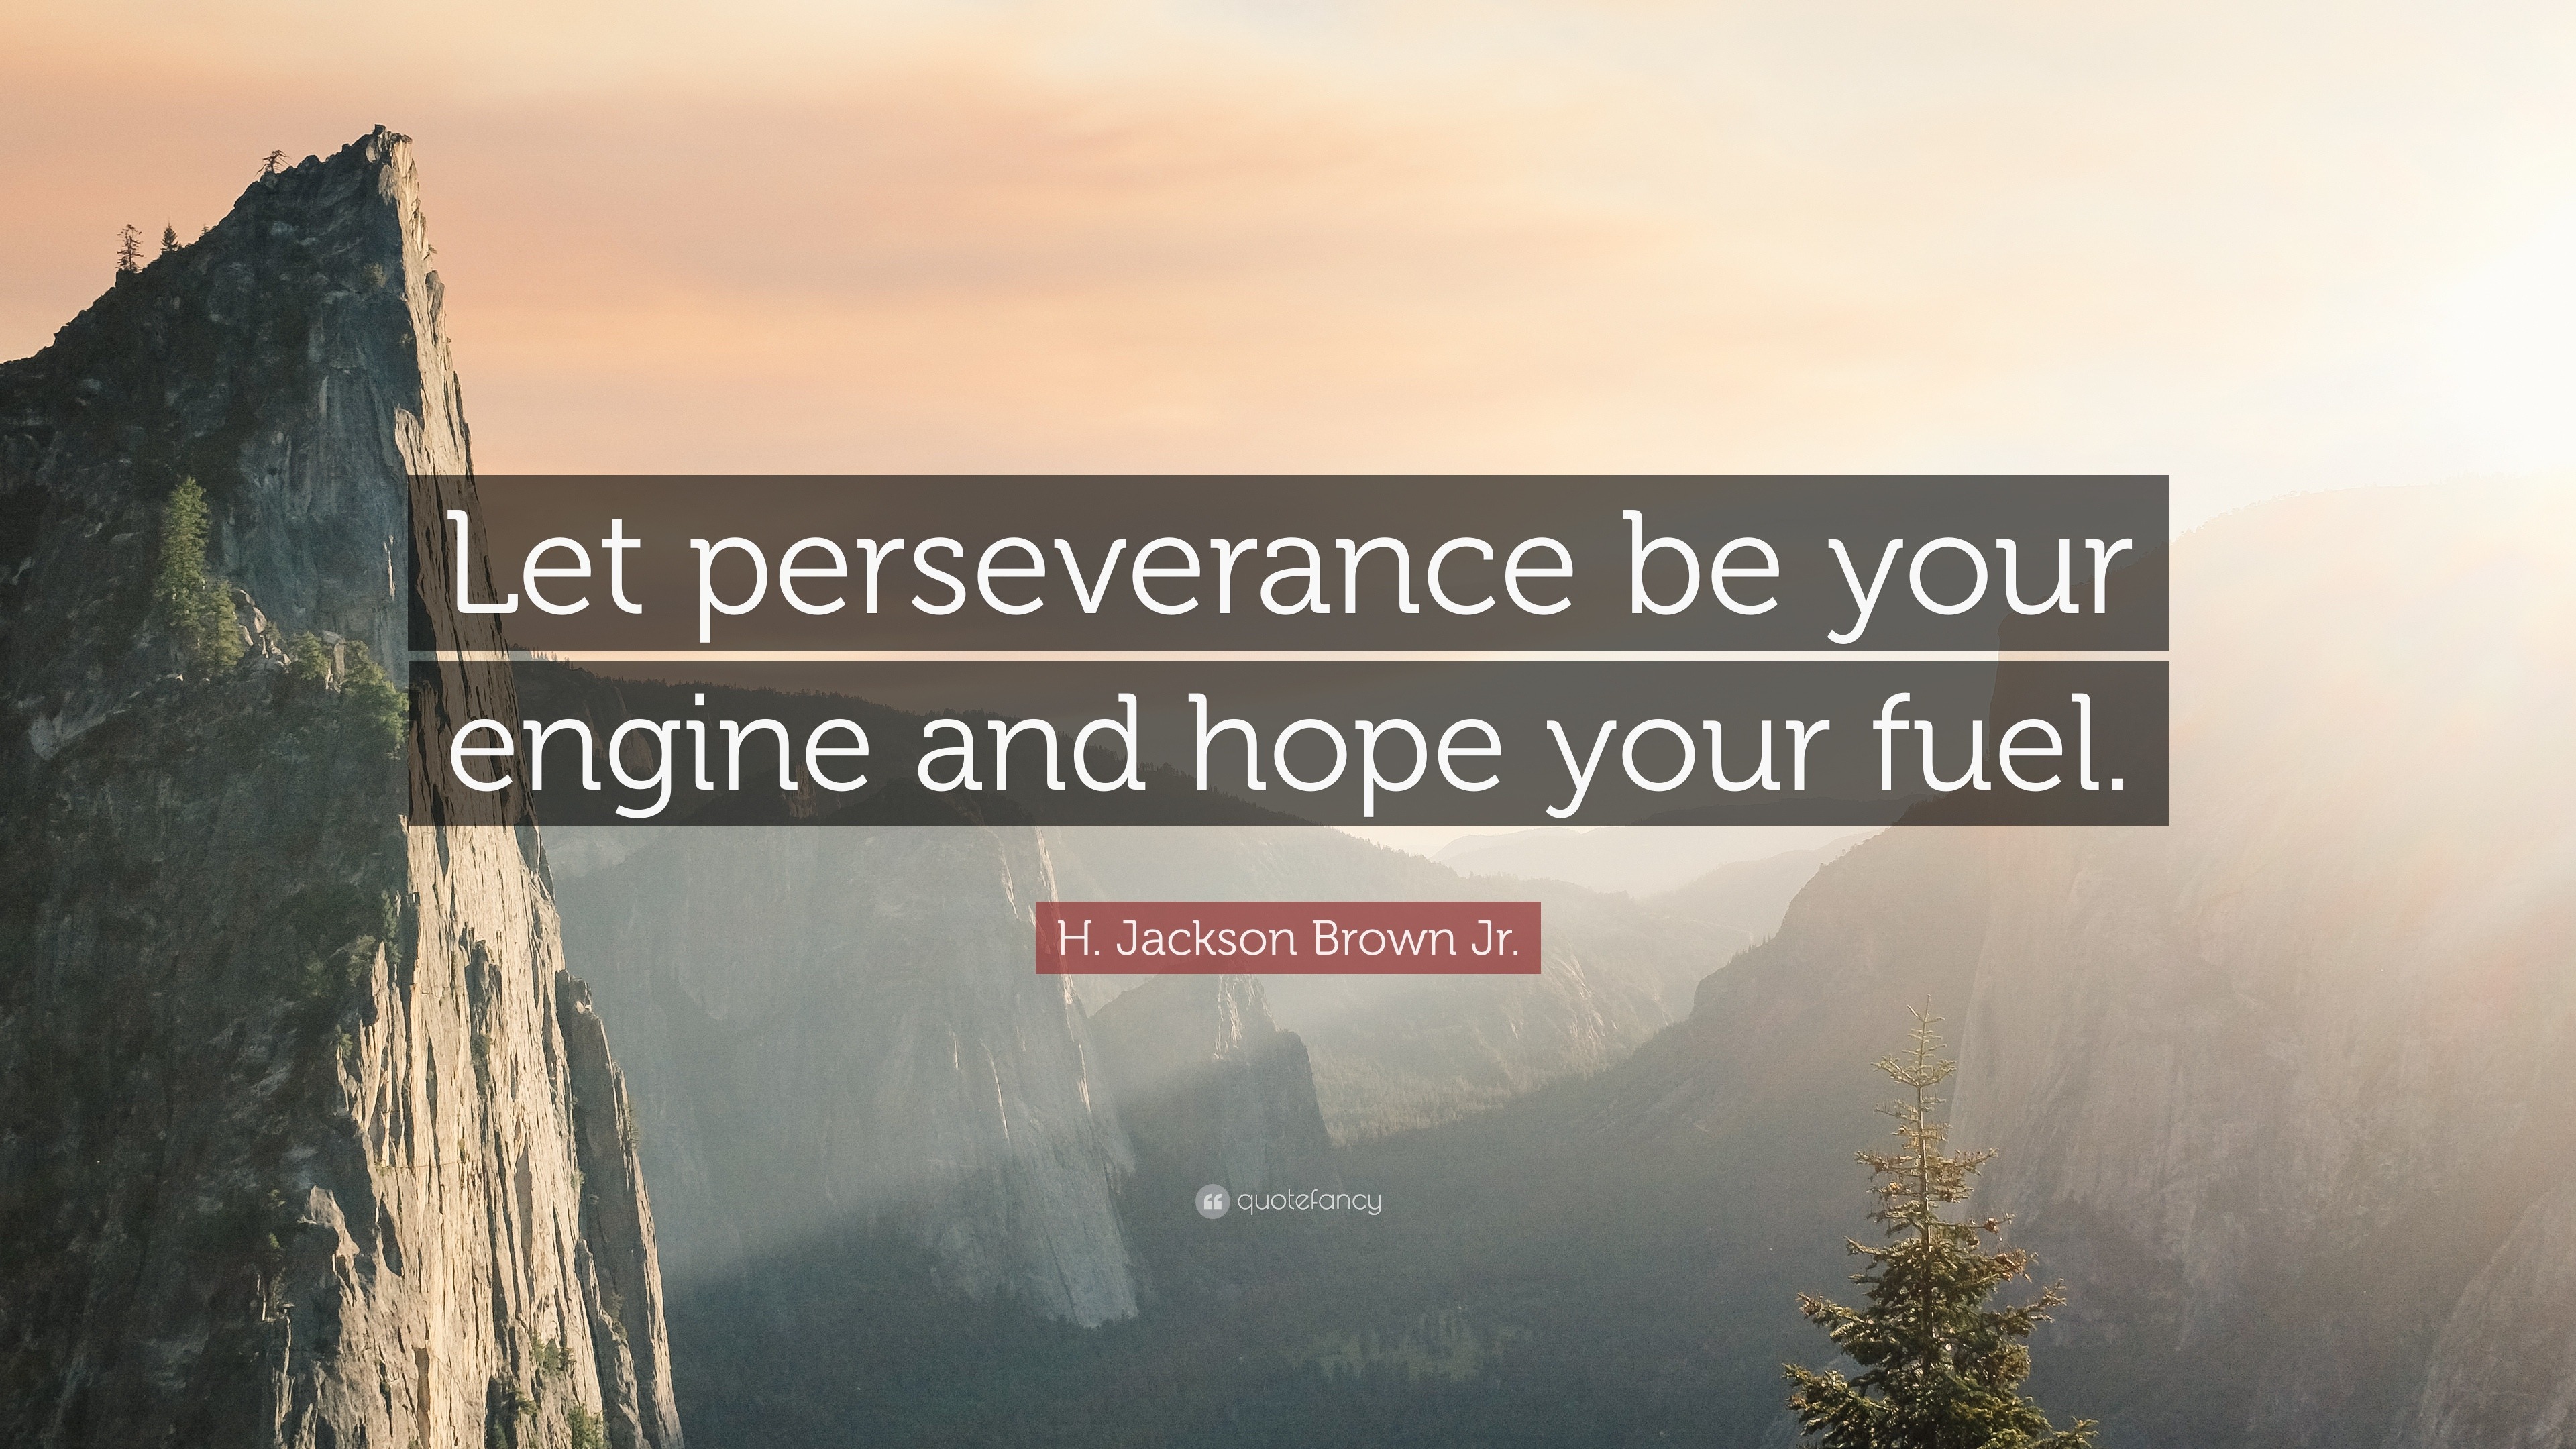 Perseverance Quotes (58 Wallpapers) - Quotefancy